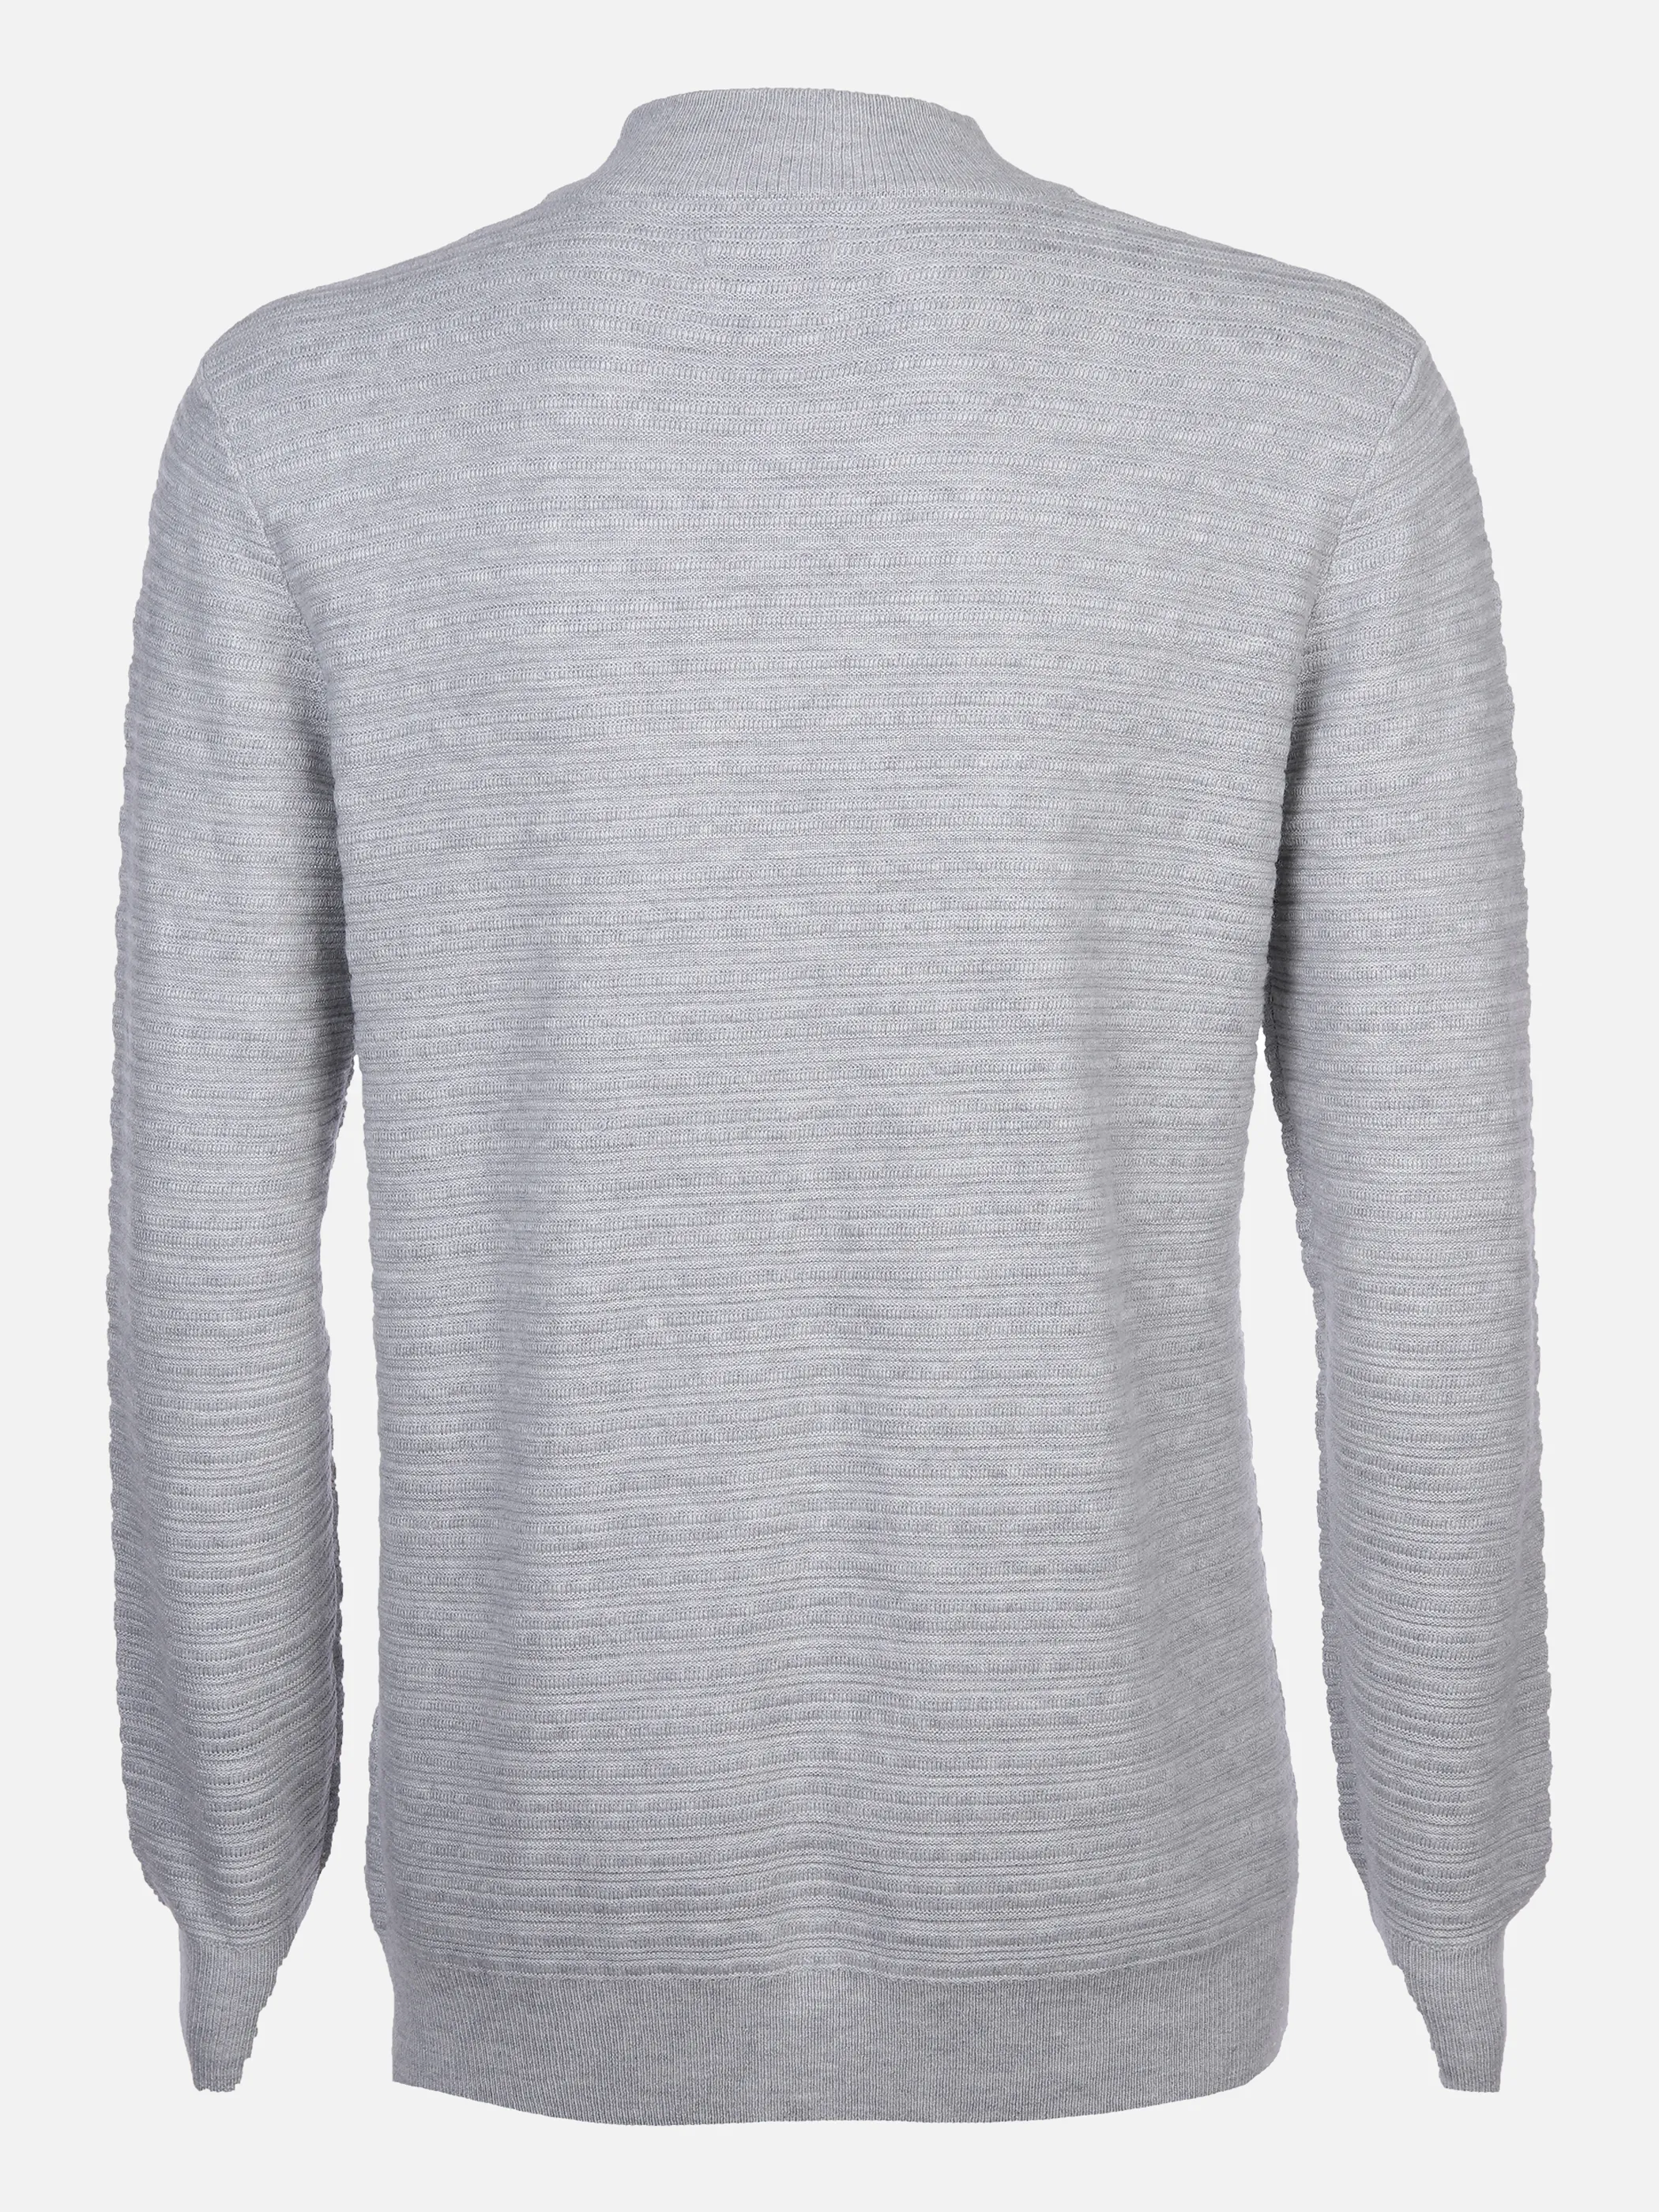 Tom Tailor 1032305 structured wool knitte Grau 869530 30193 2